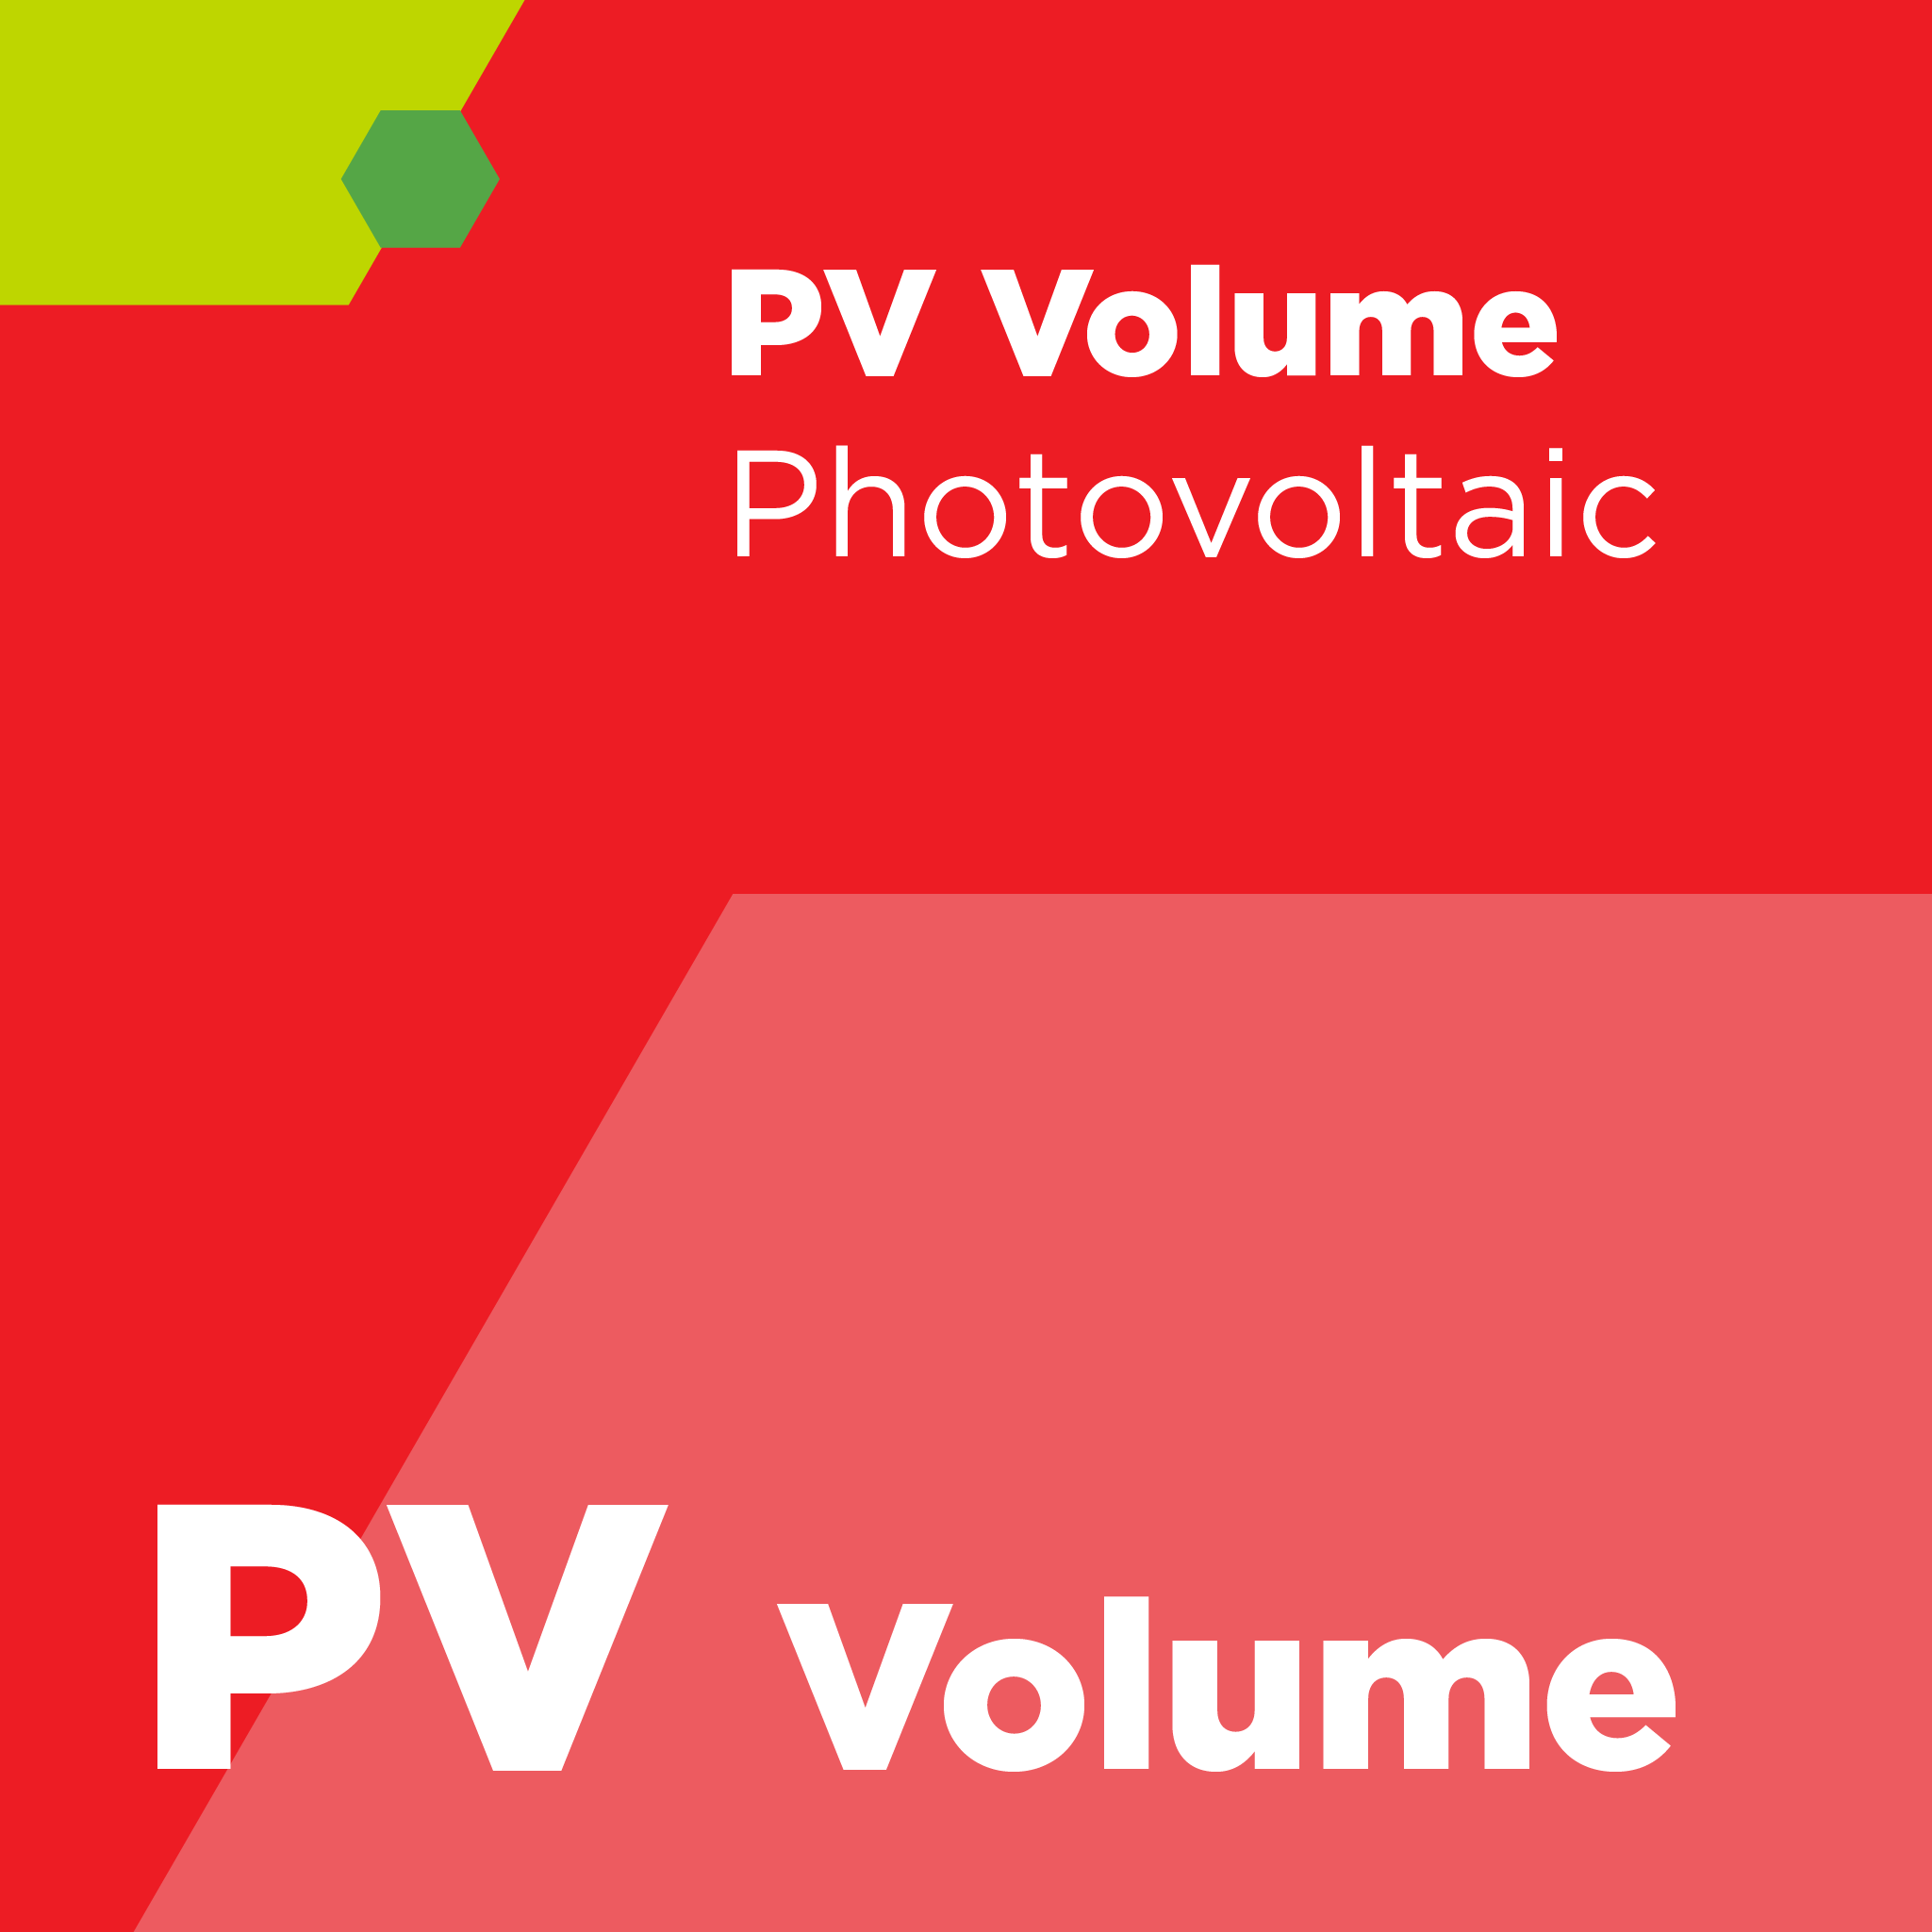 PV01500 - SEMI PV15 - Guide for Defining Conditions for Angle Resolved Light Scatter Measurements to Monitor the Surface Roughness and Texture of PV Materials